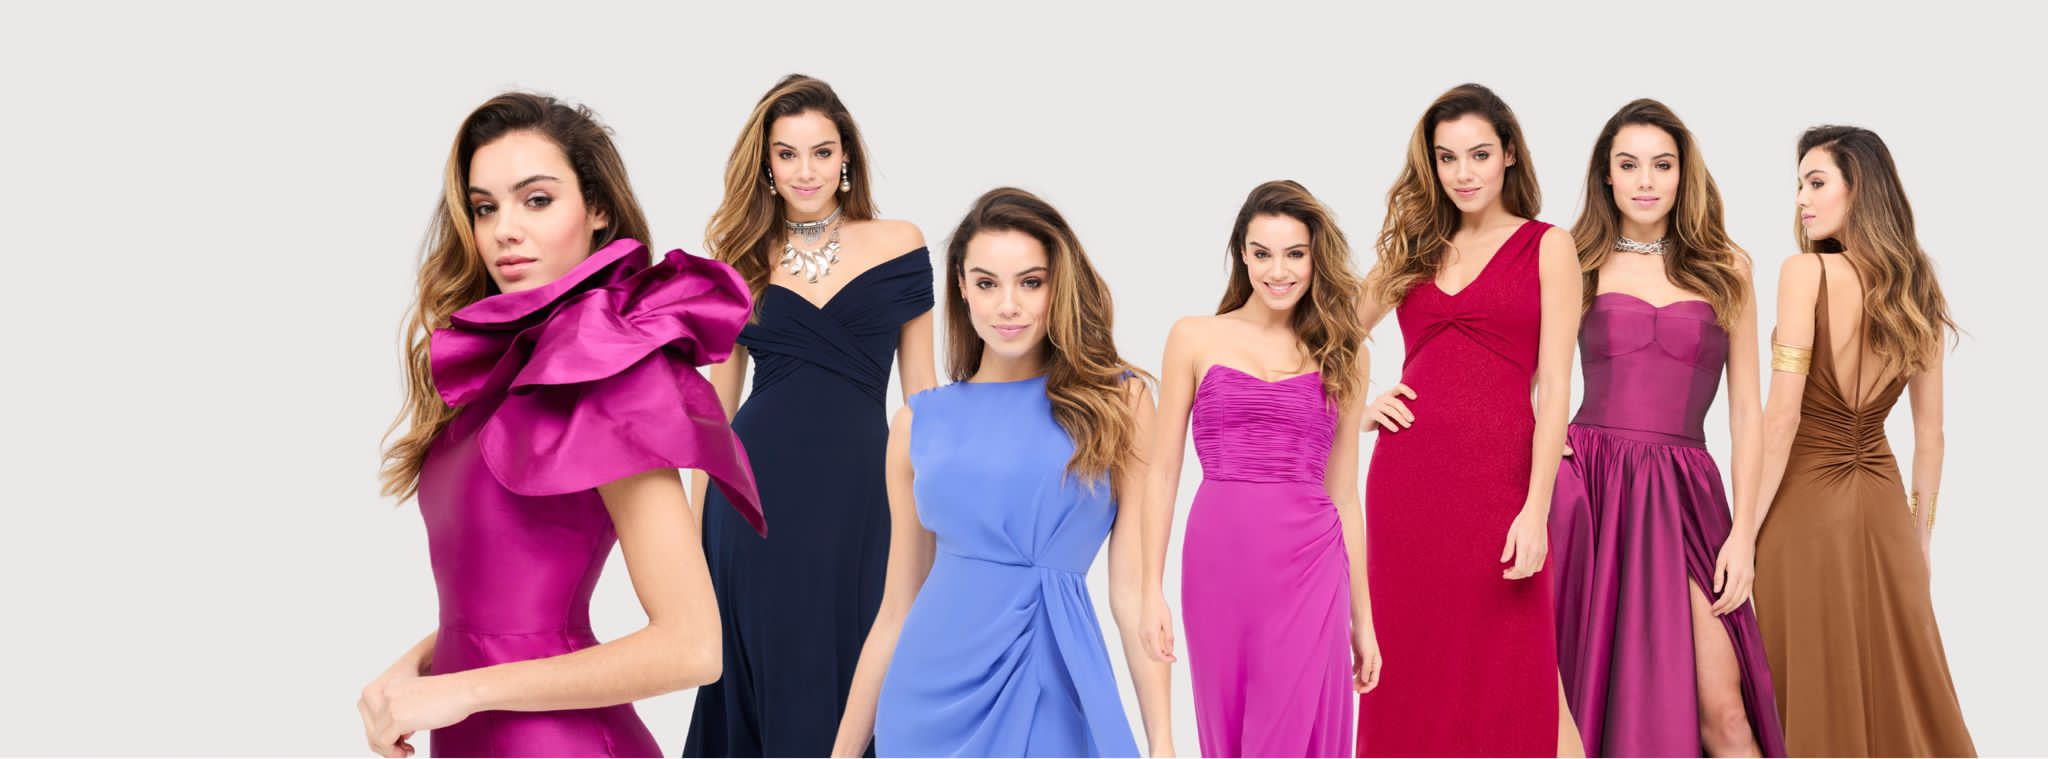 NEW COLLECTION OF PARTY DRESSES: AN ODE TO BEAUTY AND SOPHISTICATION